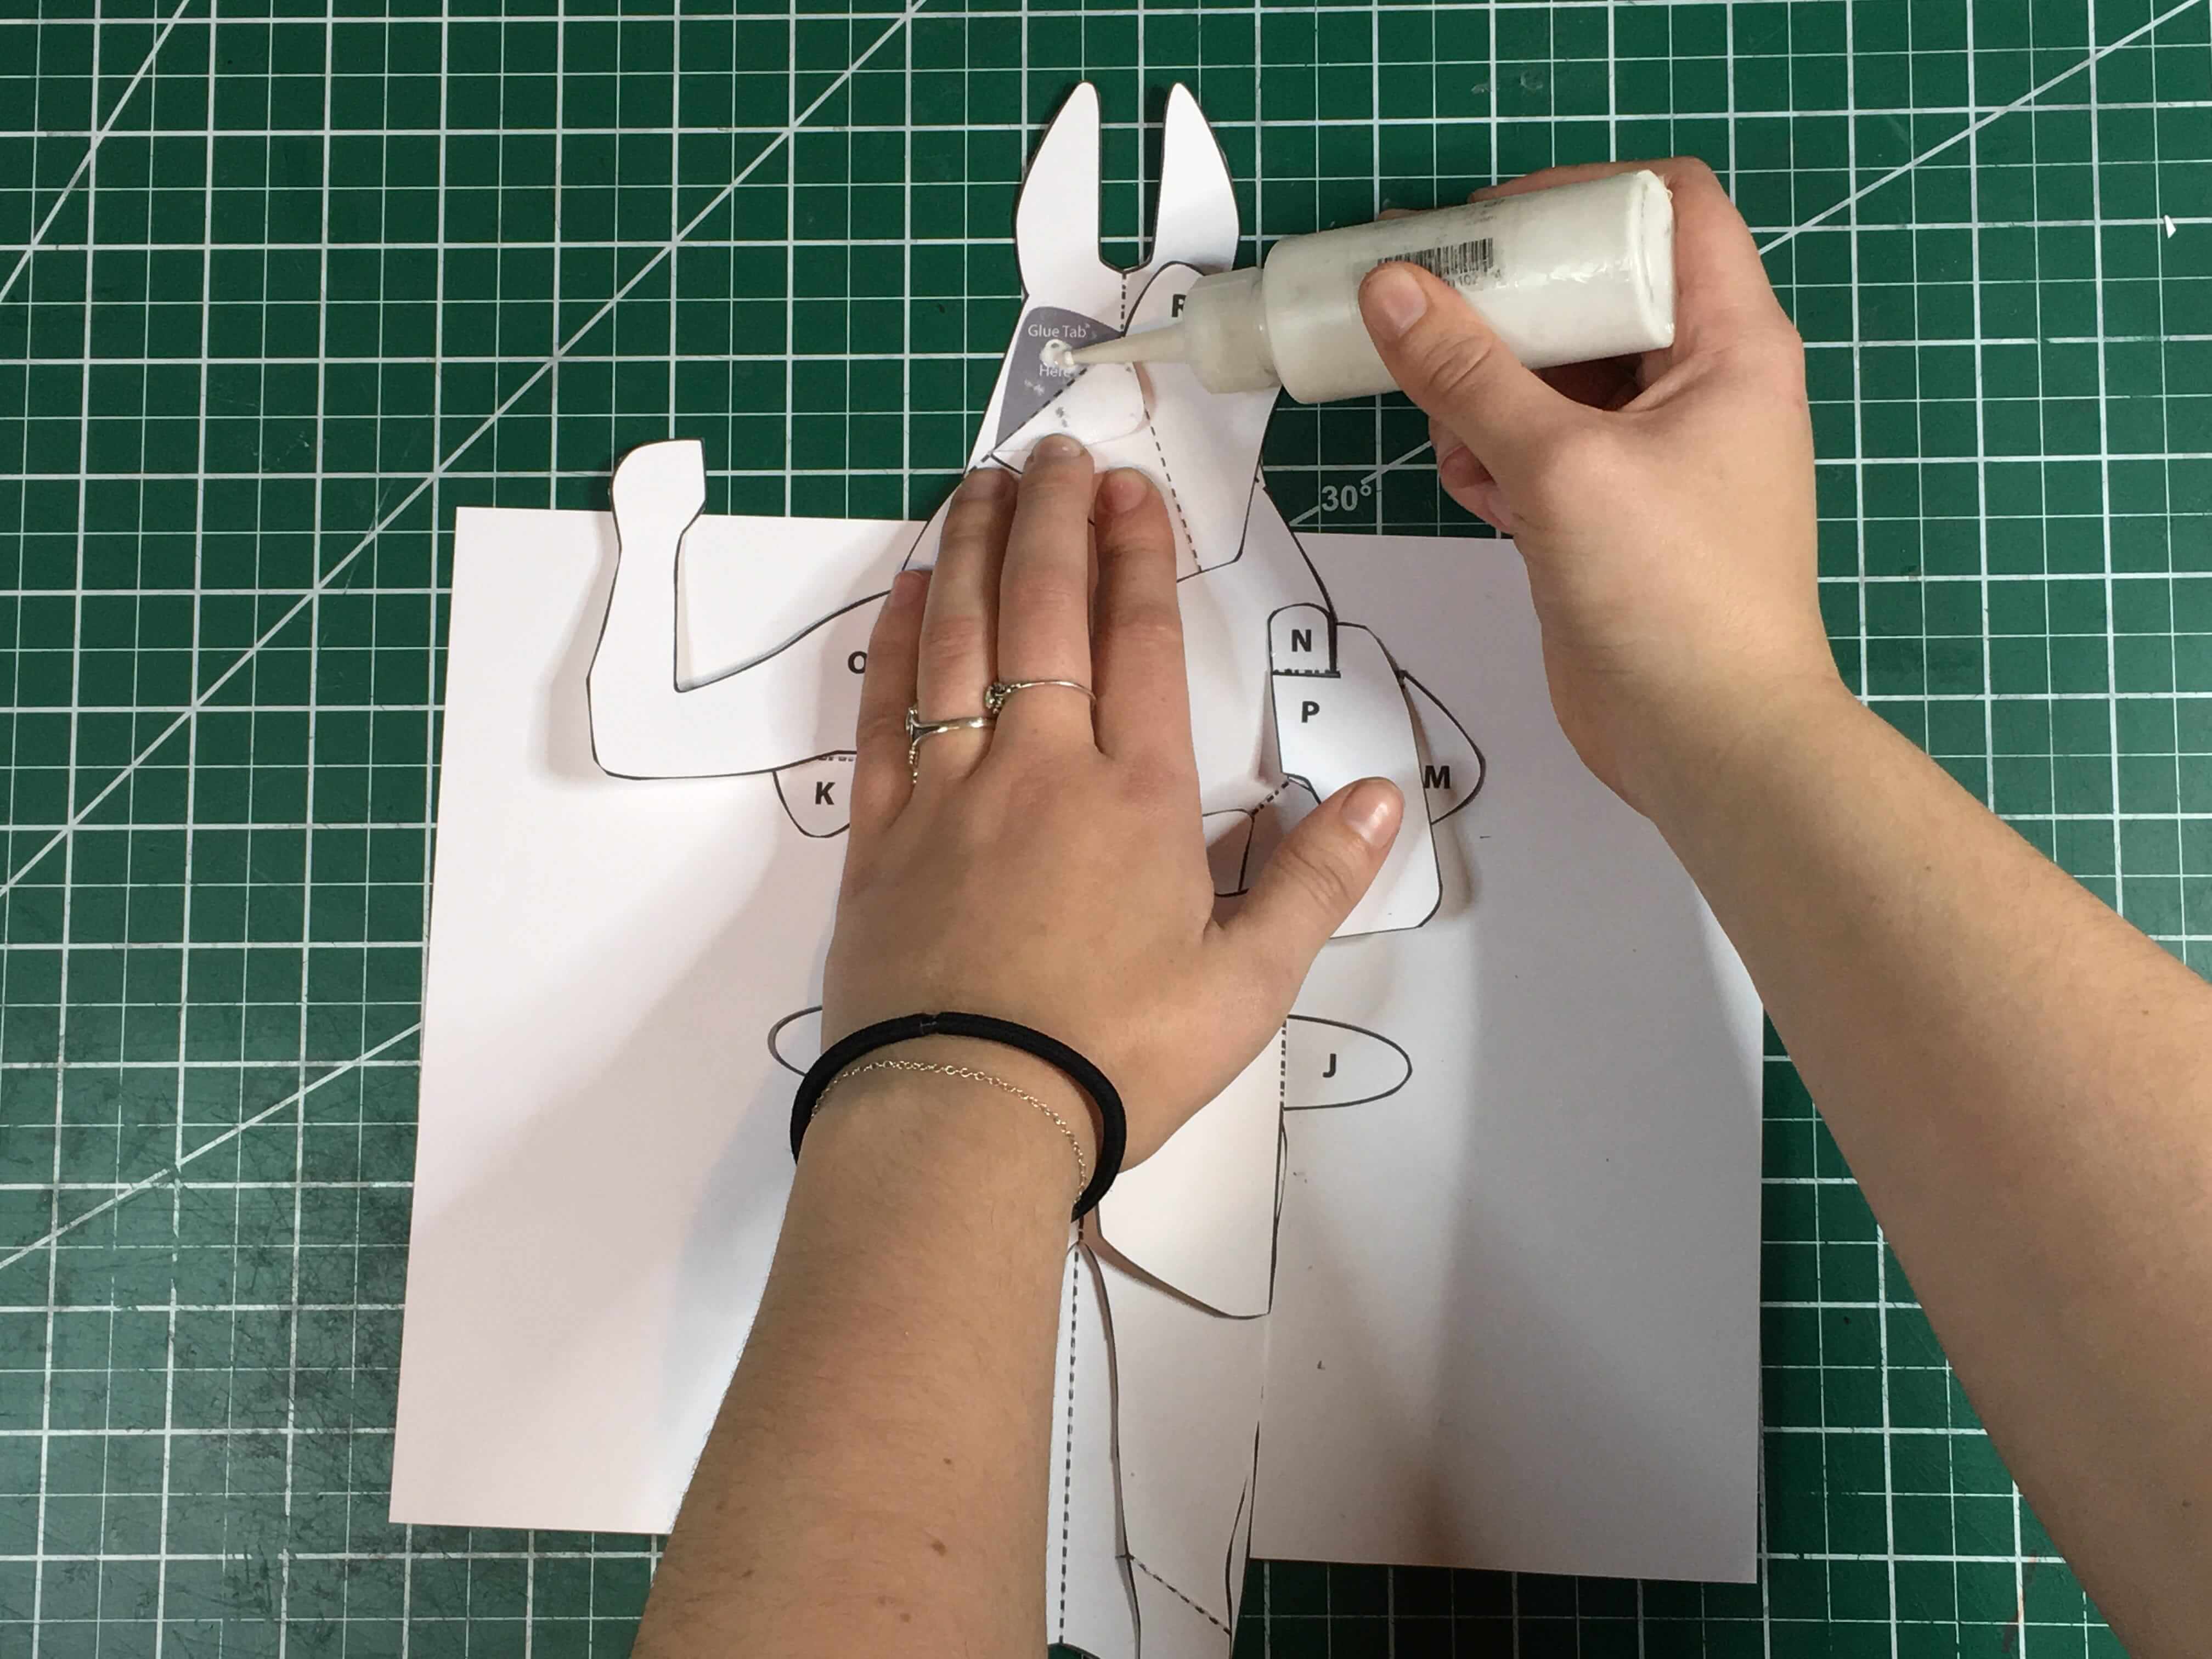 How to Make Your Own Pop-Up Creature - Science Friday